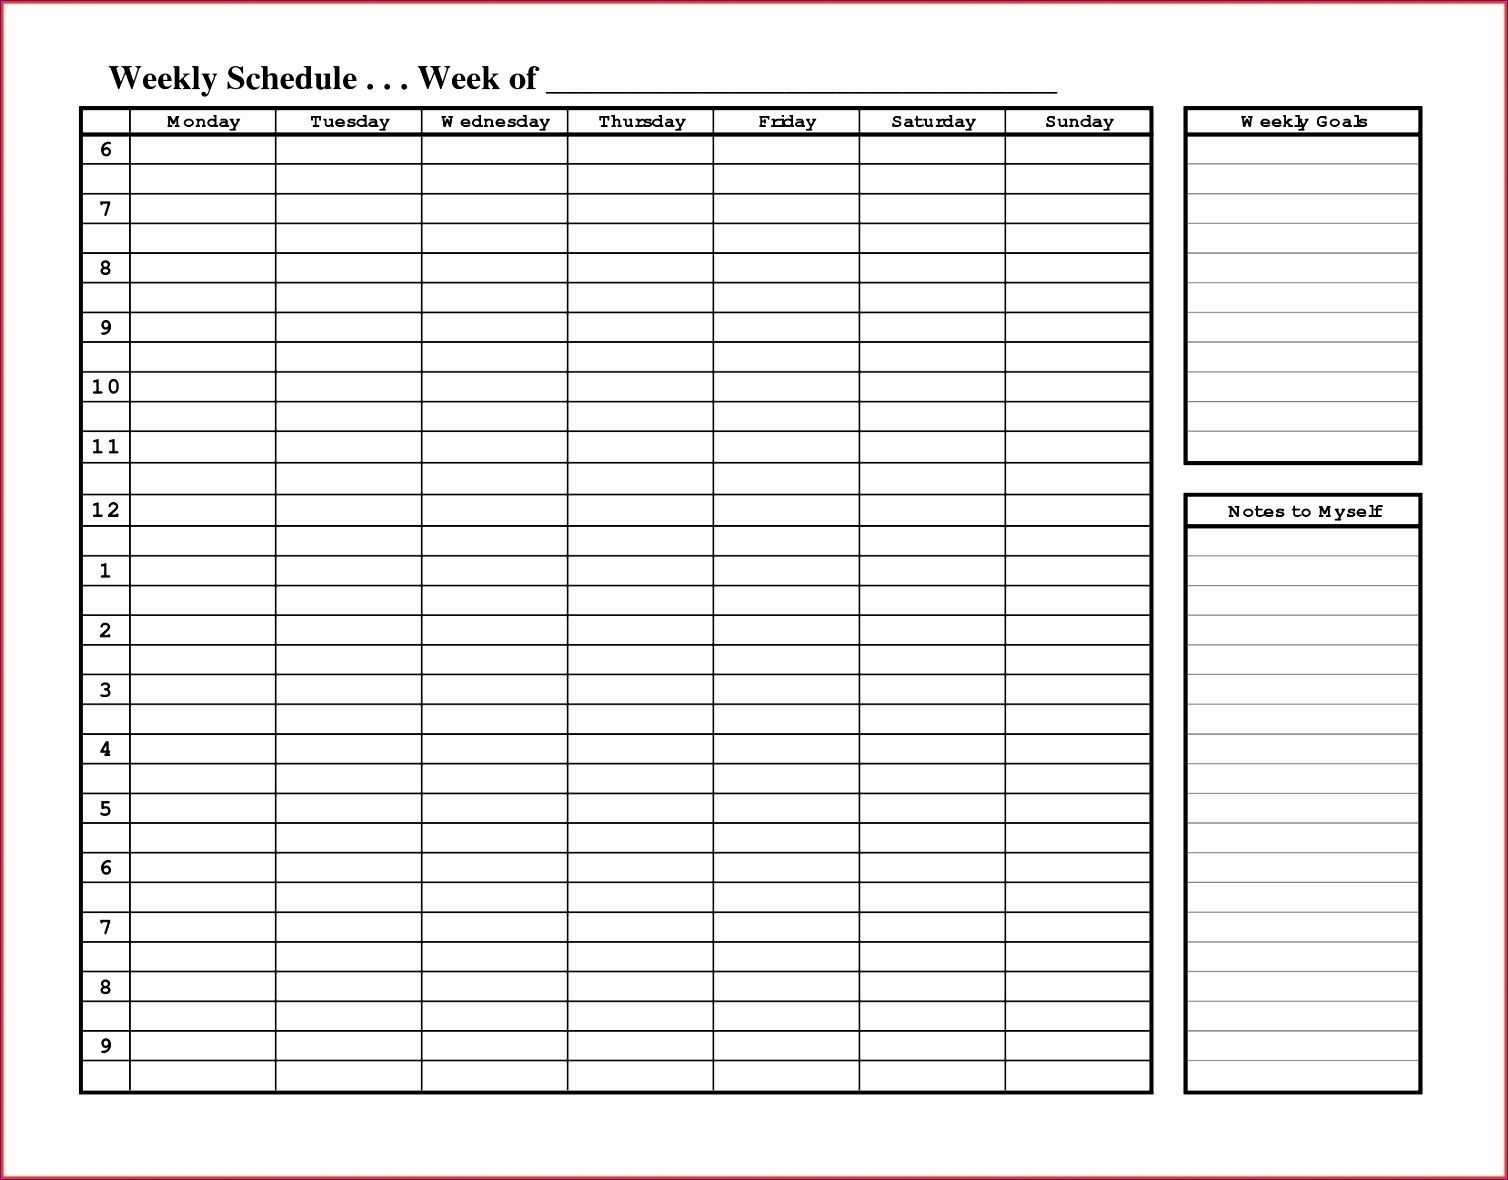 Daily Appointment Calendar Printable E With Time Slots